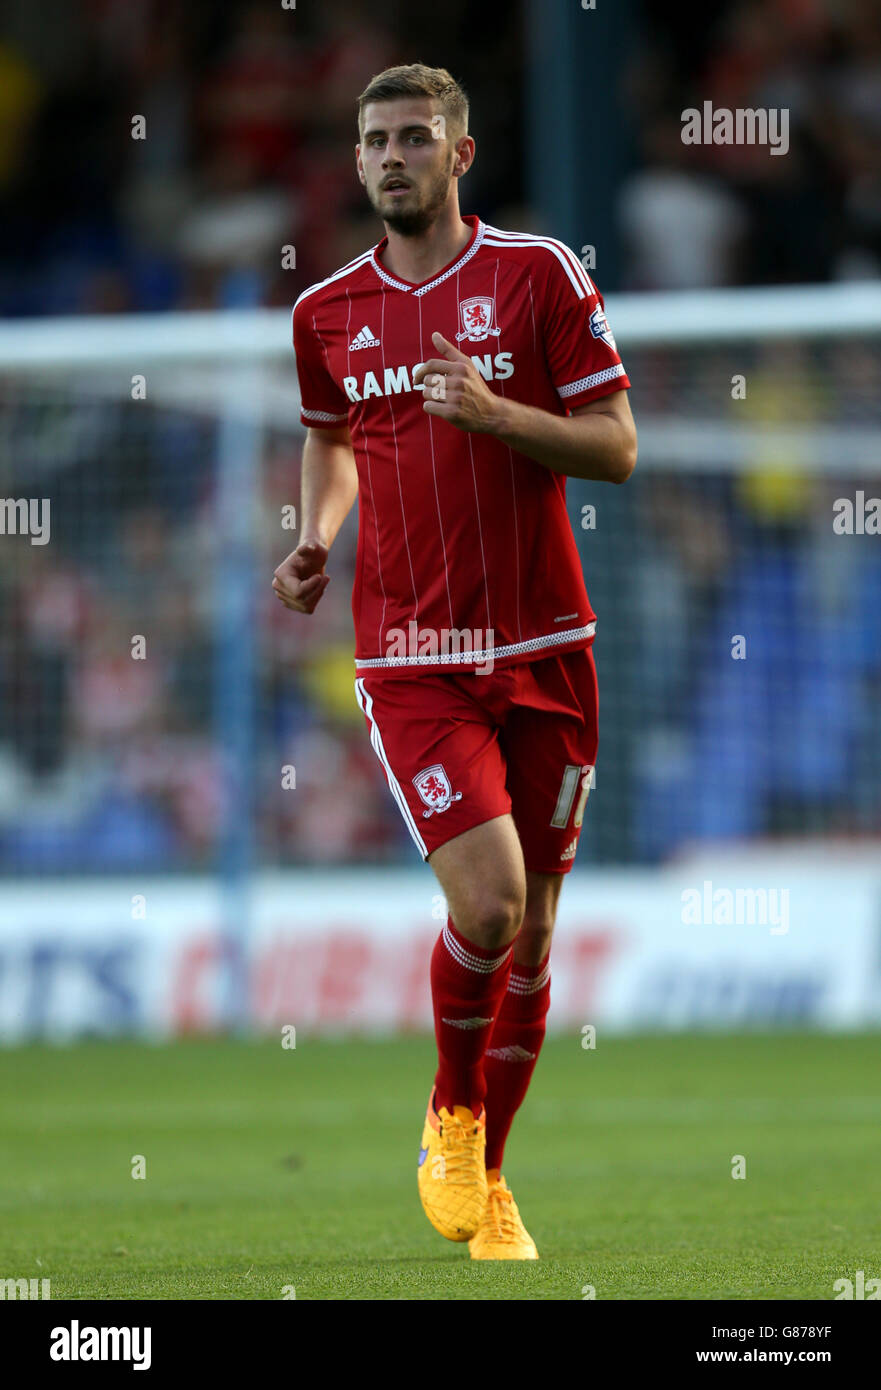 Middlesbrough's Jack Stephens during the Capital One Cup, First Round match at Boundary Park, Oldham. PRESS ASSOCIATION Photo. Picture date: Wednesday August 12, 2015. See PA story SOCCER Oldham. Photo credit should read: Simon Cooper/PA Wire. . No use with unauthorised audio, video, data, fixture lists, club/league logos or 'live' services. Online in-match use limited to 45 images, no video emulation. No use in betting, games or single club/league/player publications. Stock Photo